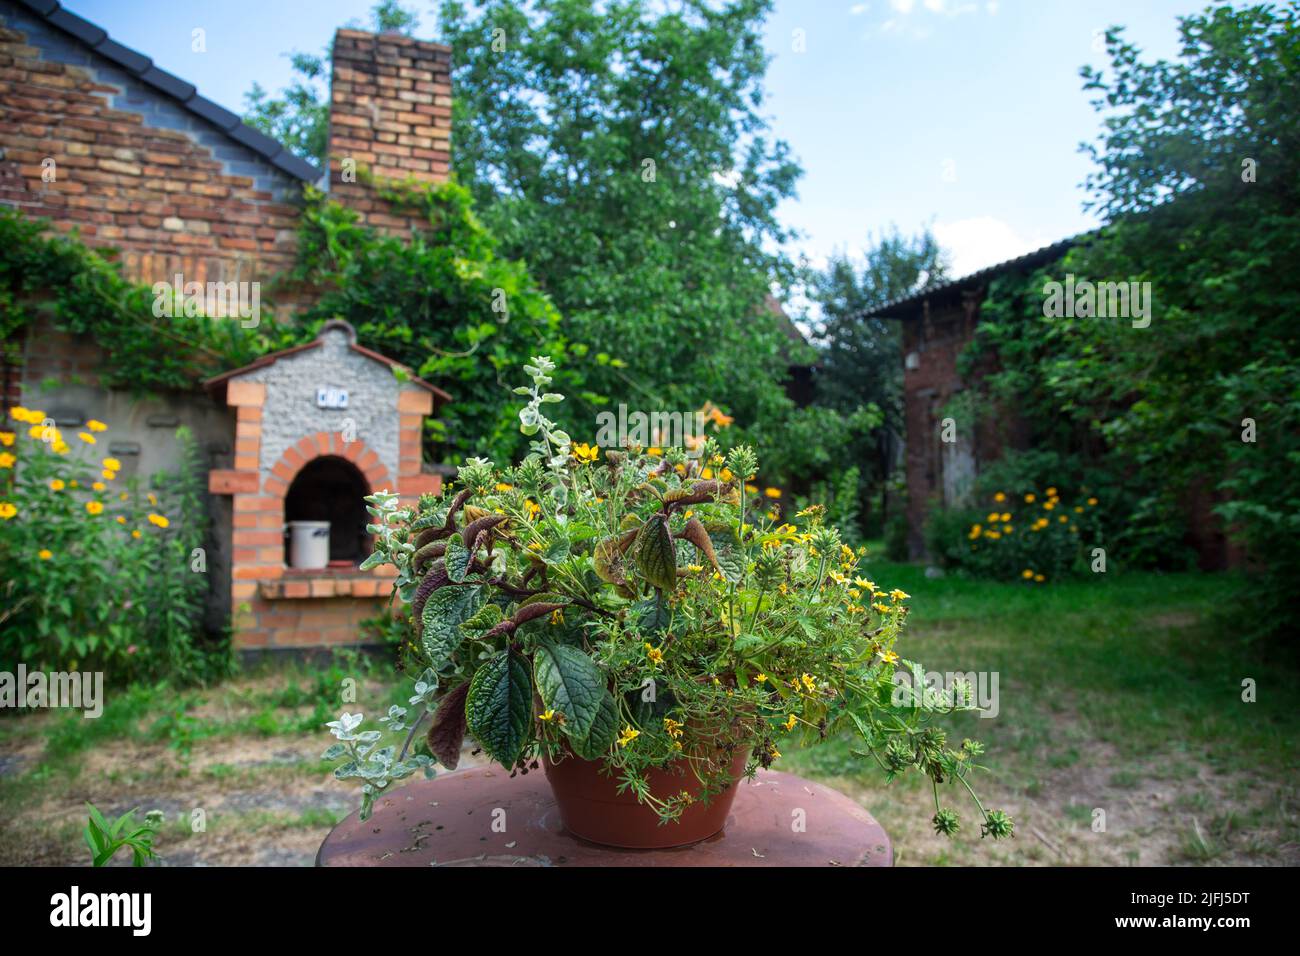 Old red brick house, Lusatia, Germany Stock Photo